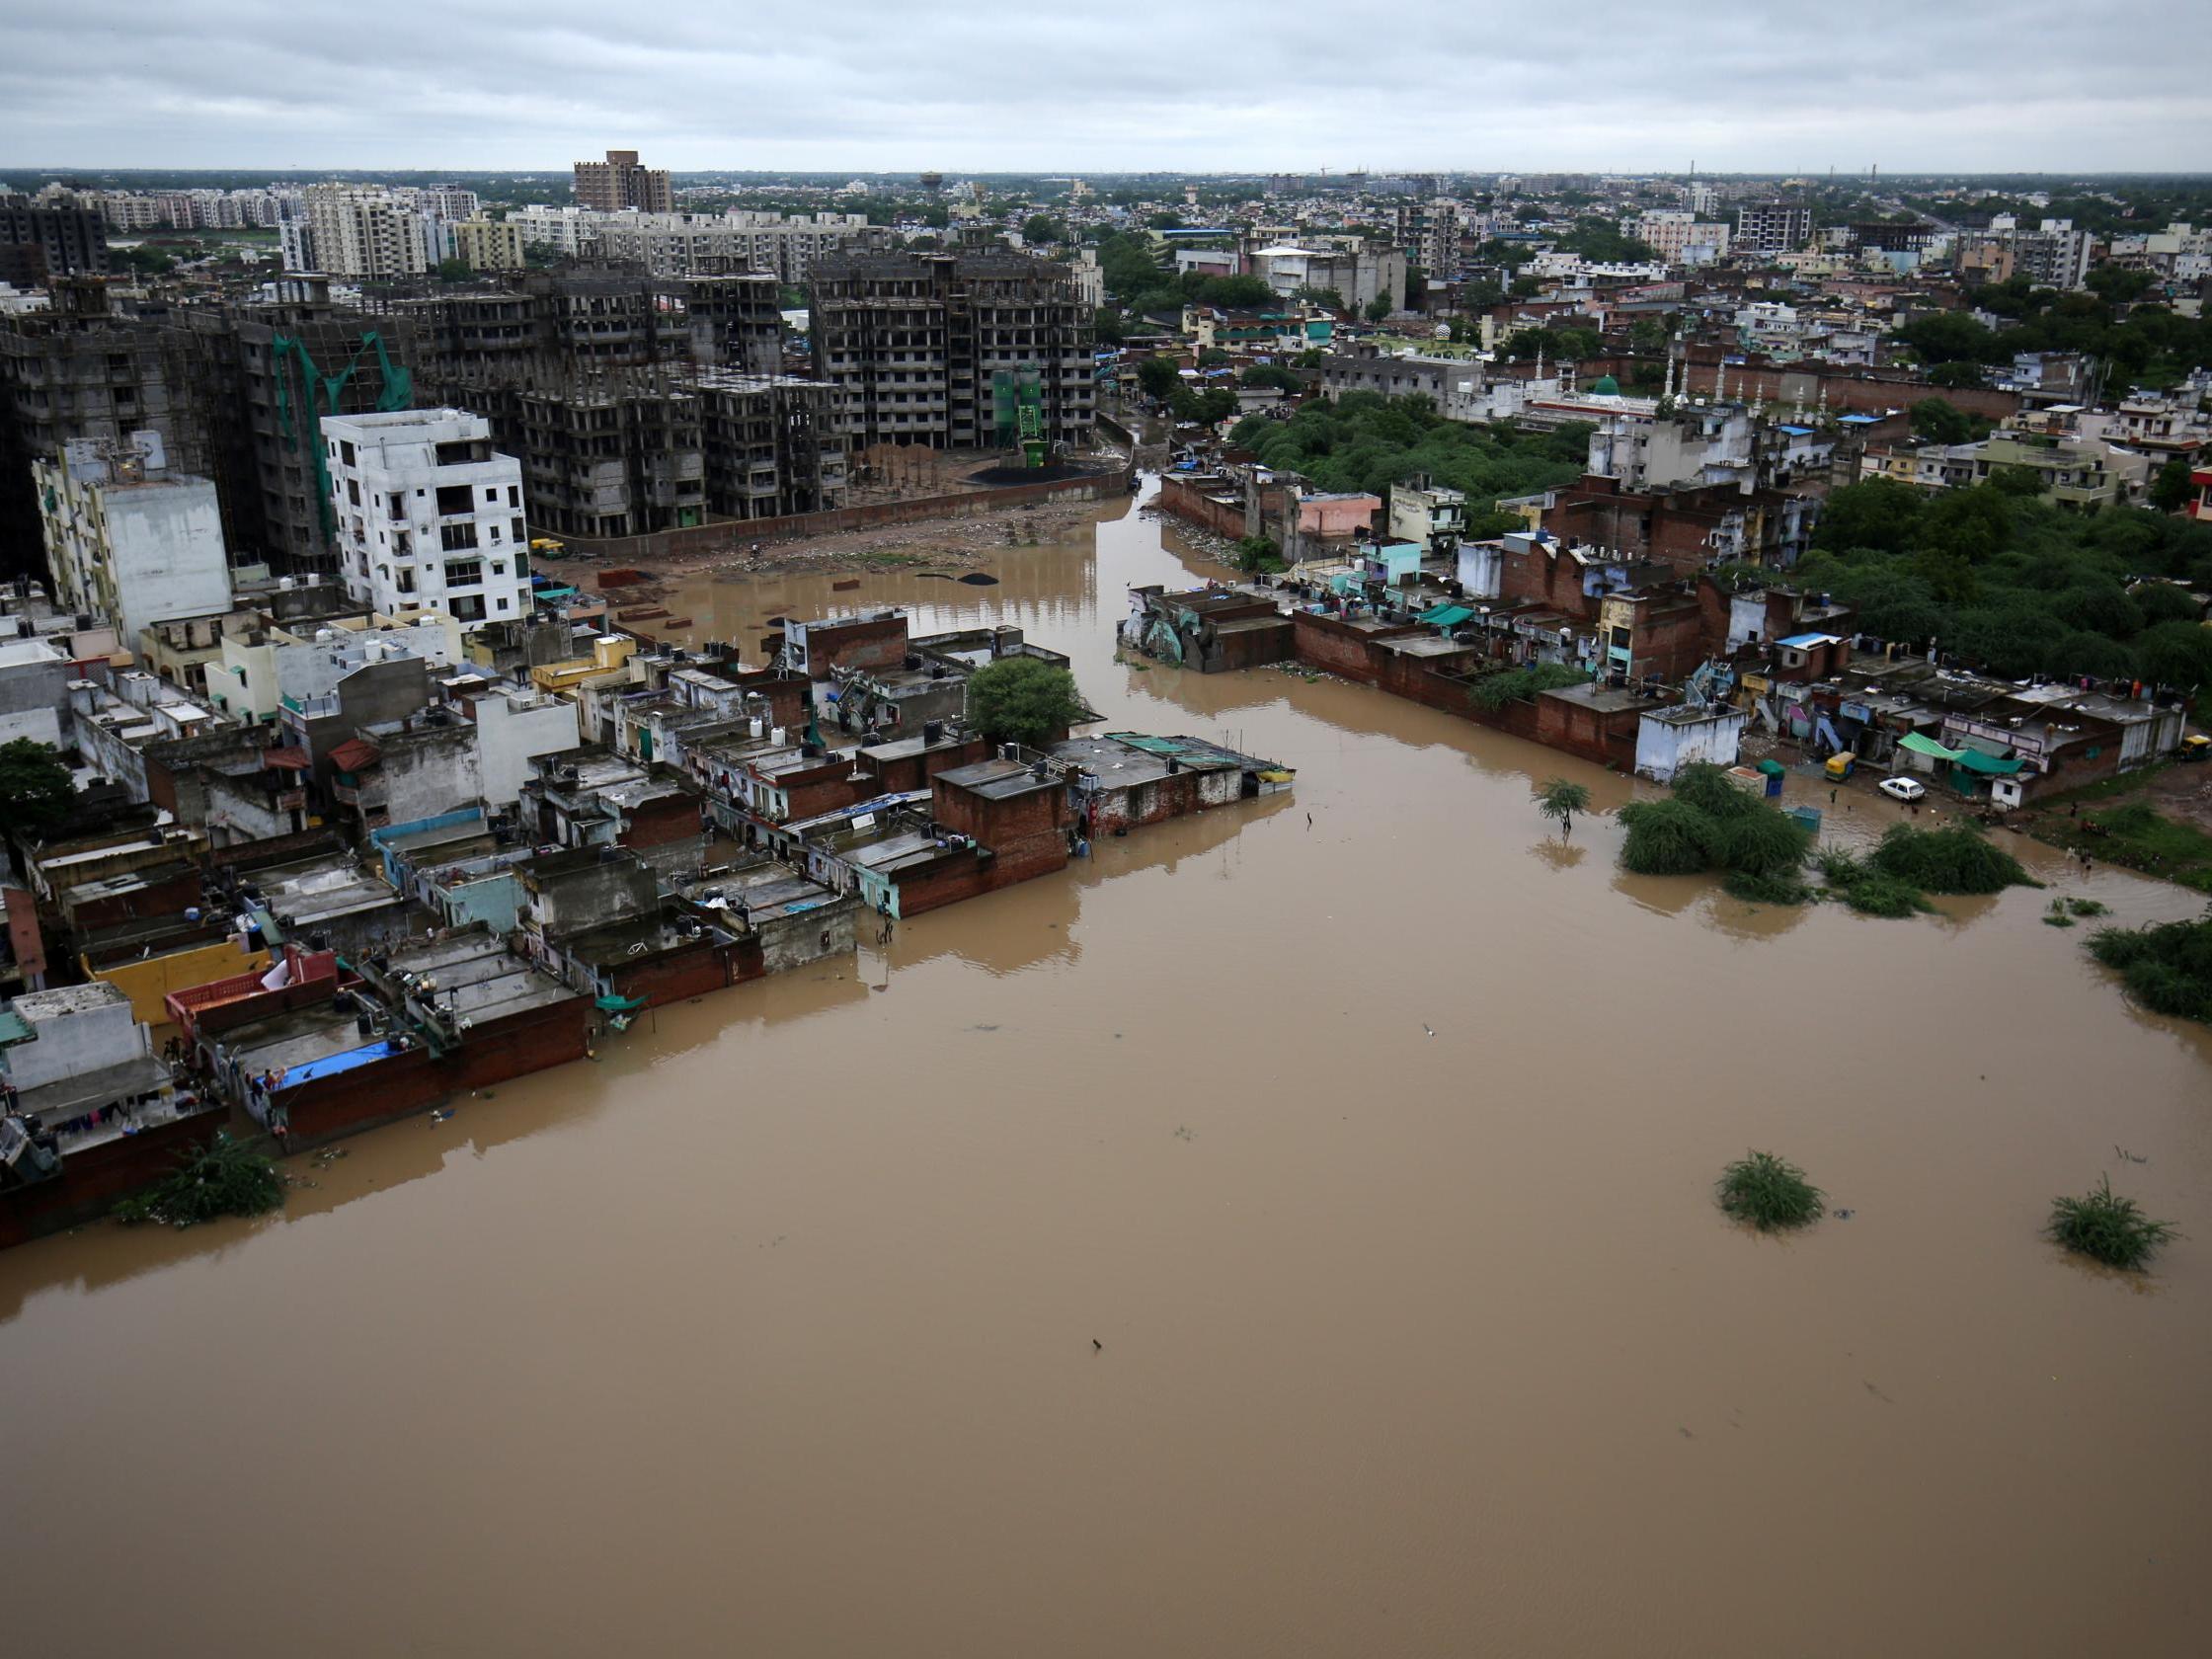 An aerial view shows a flooded residential area after heavy rains in Ahmedabad, India on 10 August 2019.